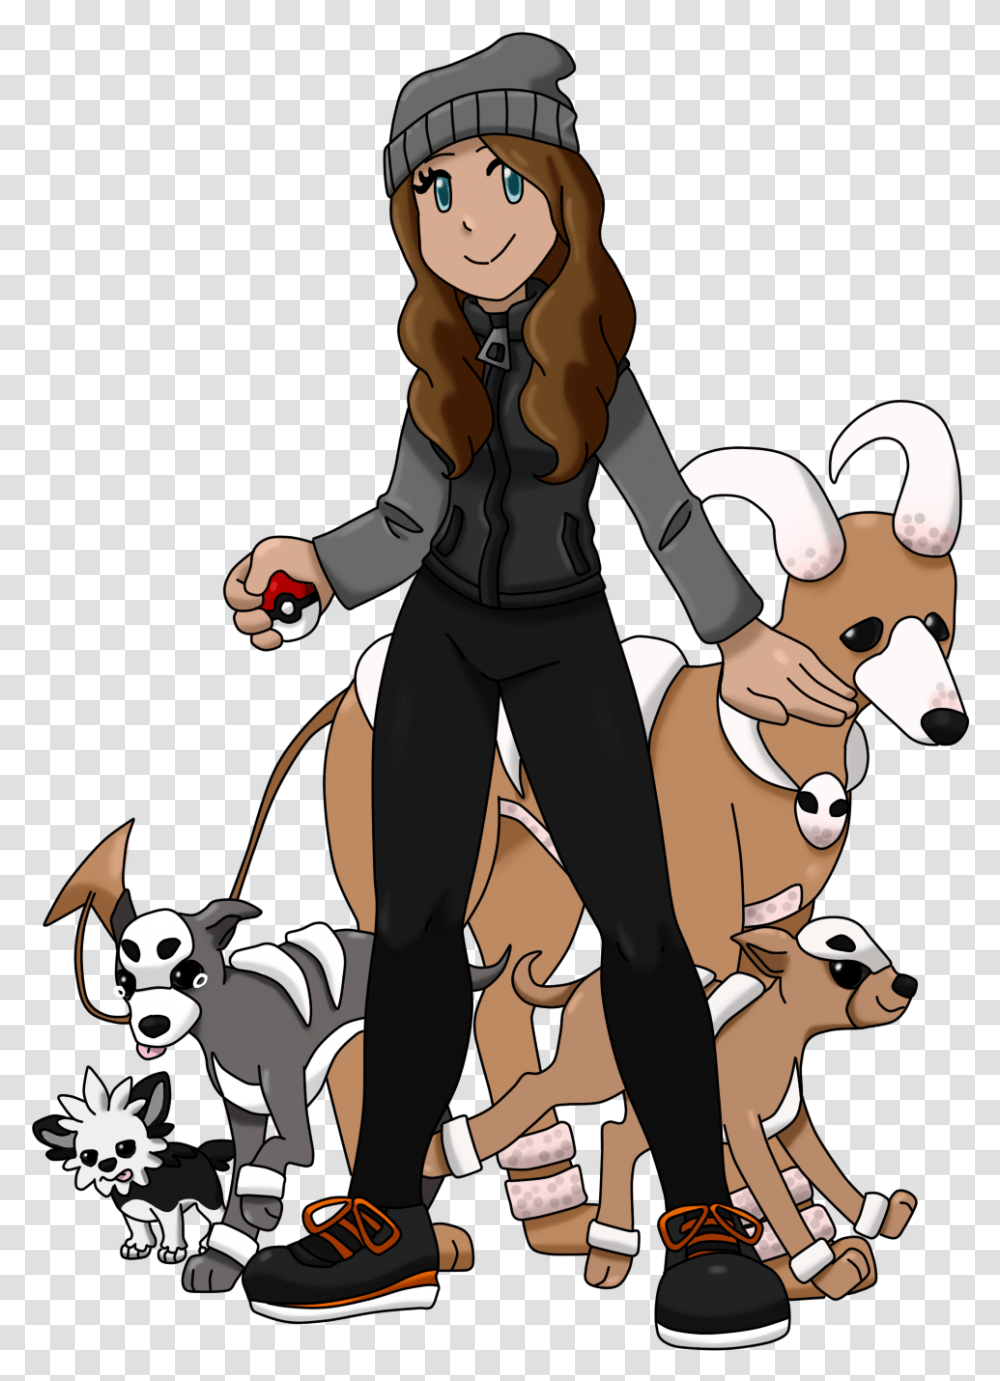 Someone Was Calling For A Jenna Marbles Pokemon Team Cartoon, Comics, Book, Person, People Transparent Png